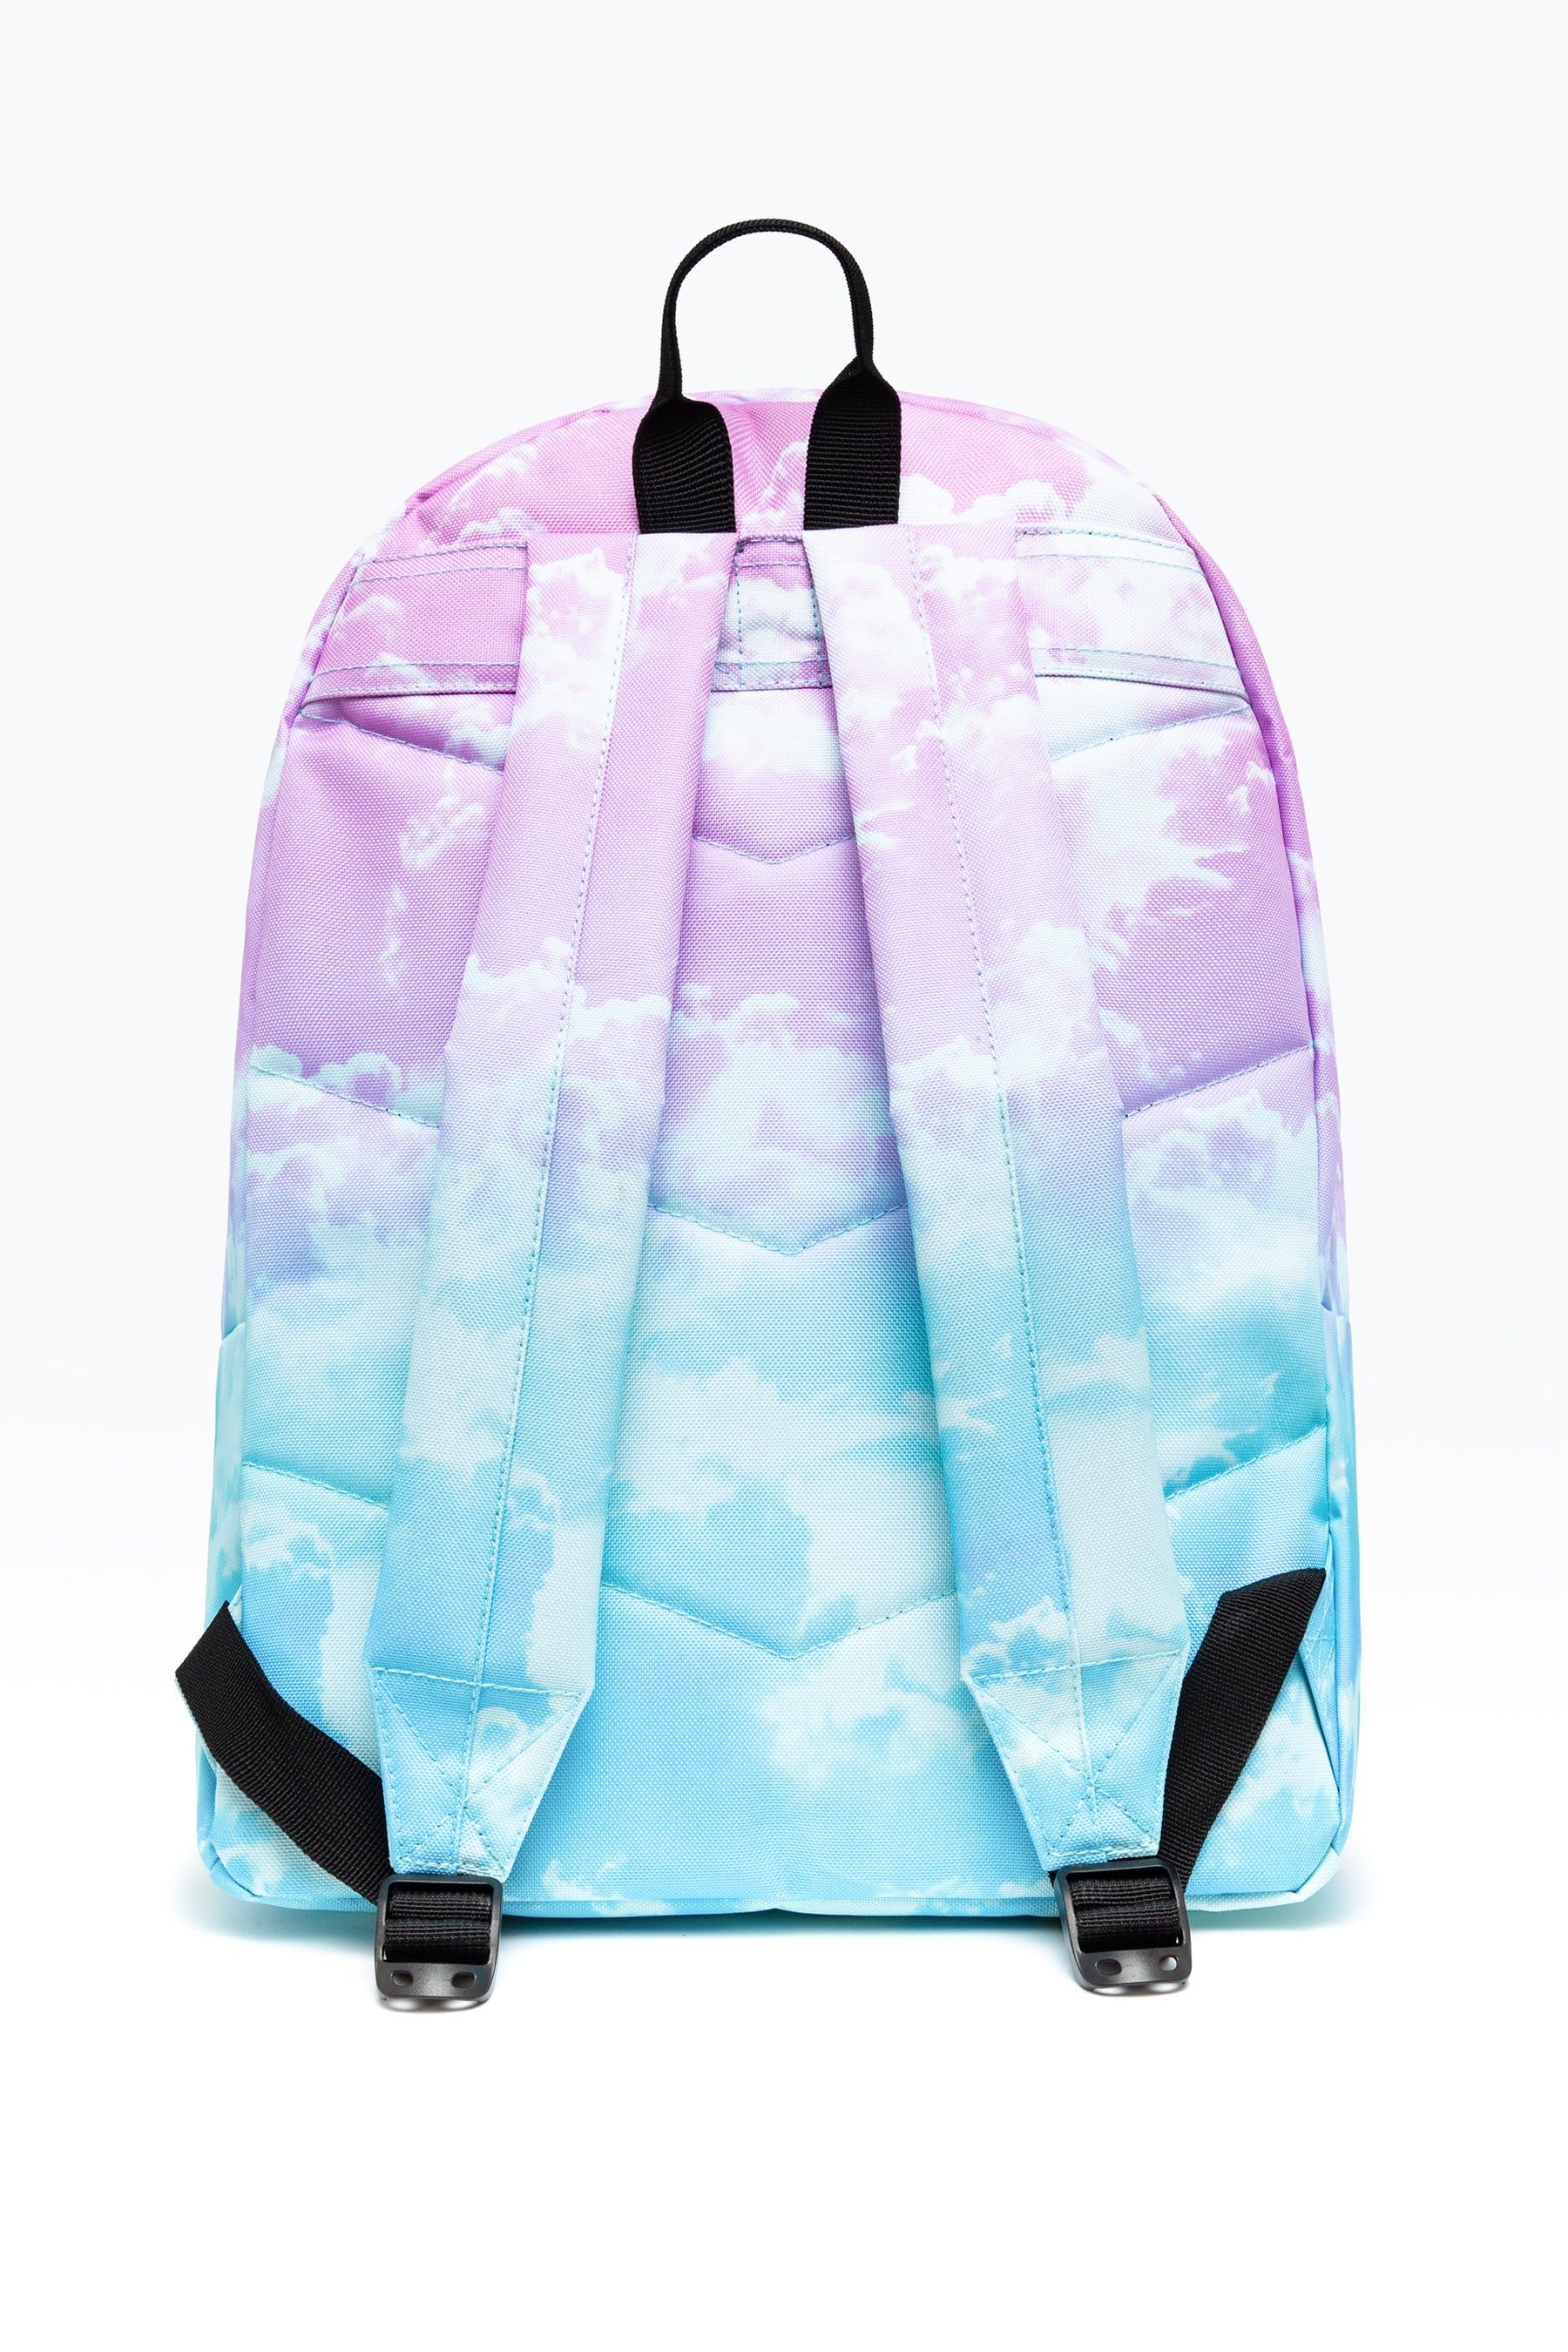 Living life on Cloud 9. The HYPE. Lilac Cloud Backpack is the ultimate summer accessory. Designed with a trending all-over cloud print combined with our signature gradient effect in a pastel pink and baby blue colour palette. Measuring at 42cms x 30cms x 12cms, finished with a front mini pocket, grab handle, embossed zips and inside branded lining. Finished with the iconic HYPE. crest badge in monochrome embroidered on the front. The straps offer supreme comfort with just the right amount of padding. Wipe clean only.